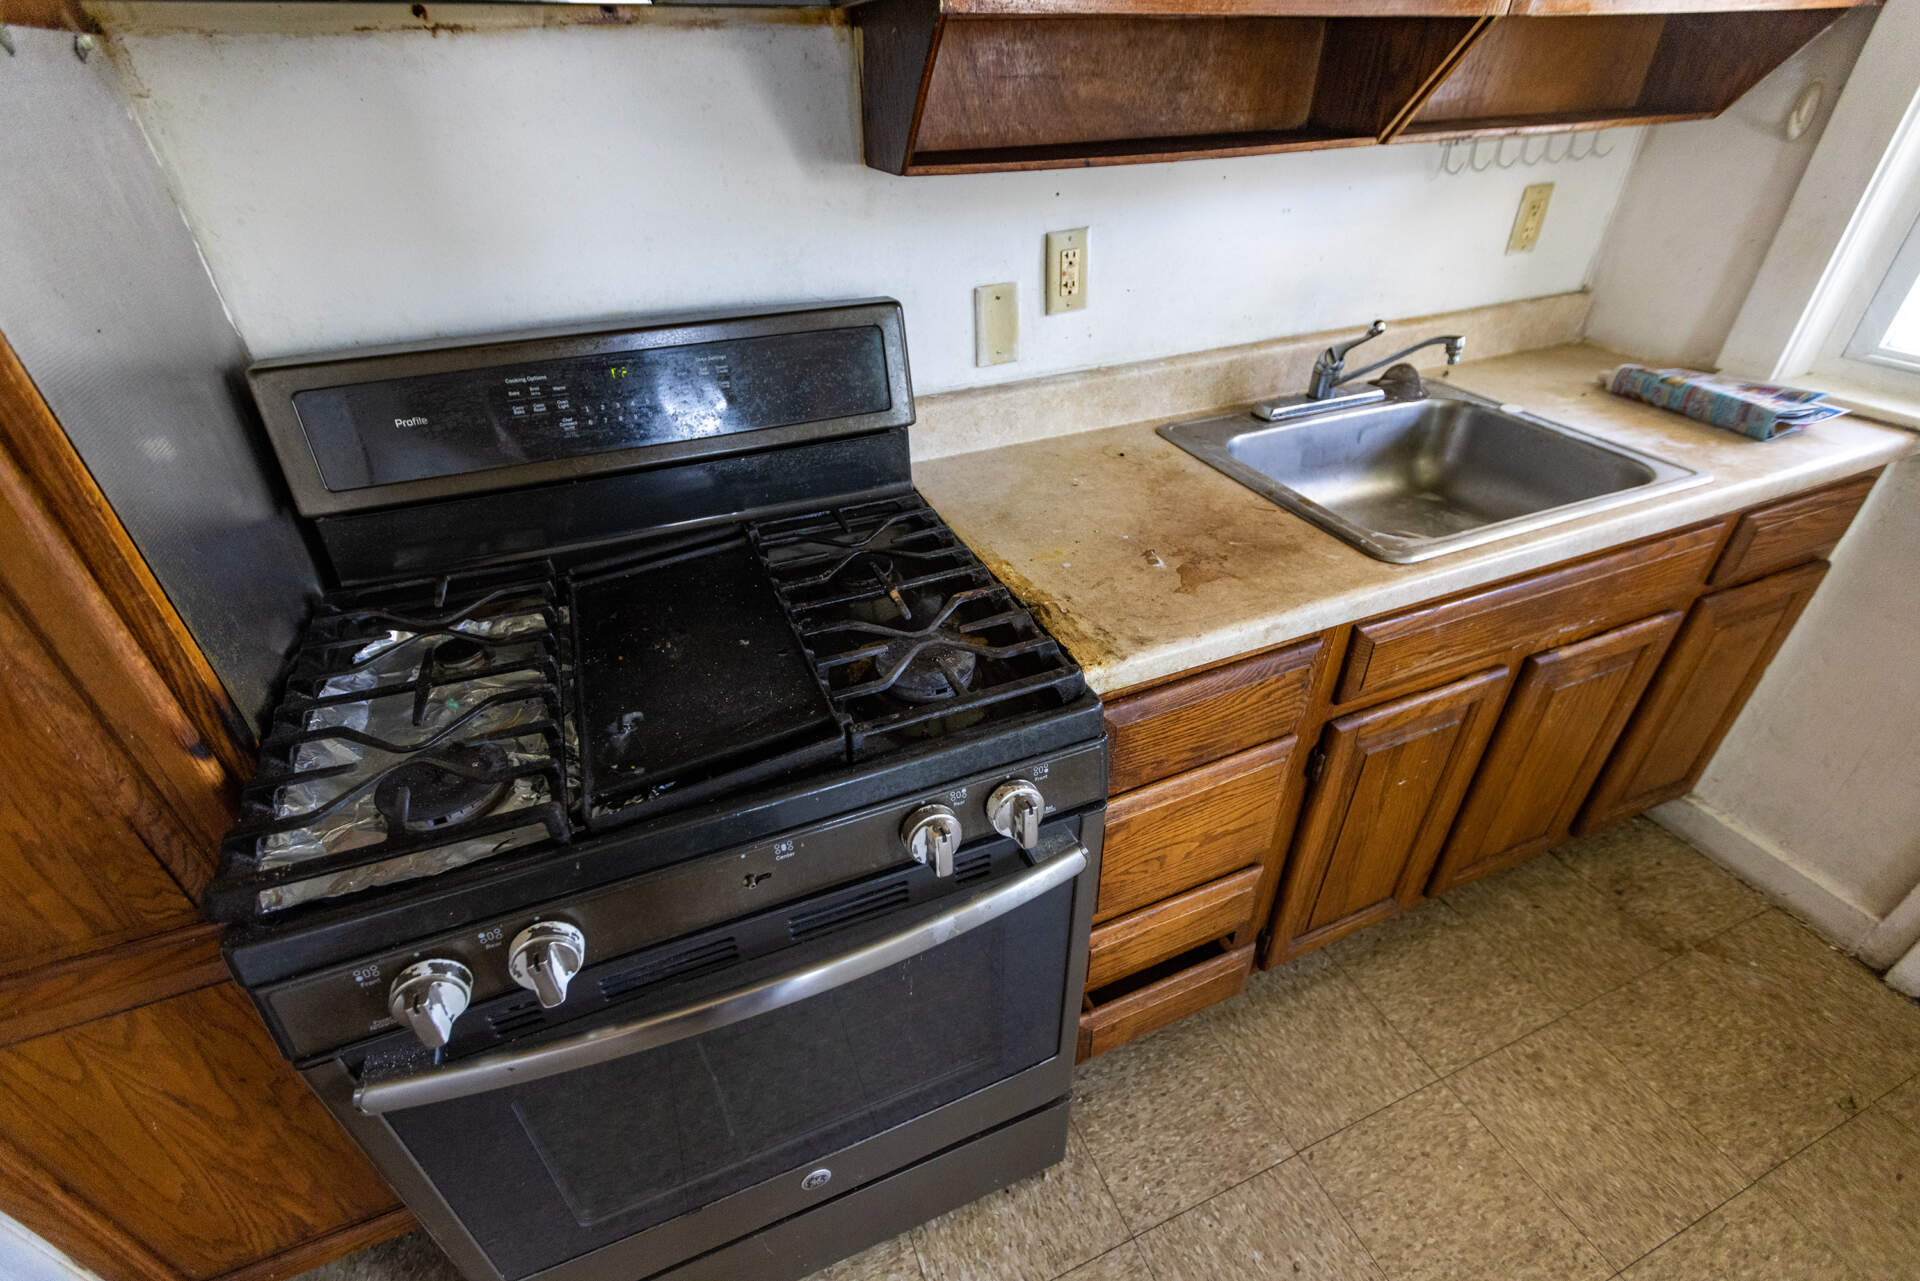 The kitchen of a unit that needs renovation in the Lexington Gardens public housing complex in Watertown. (Jesse Costa/WBUR)